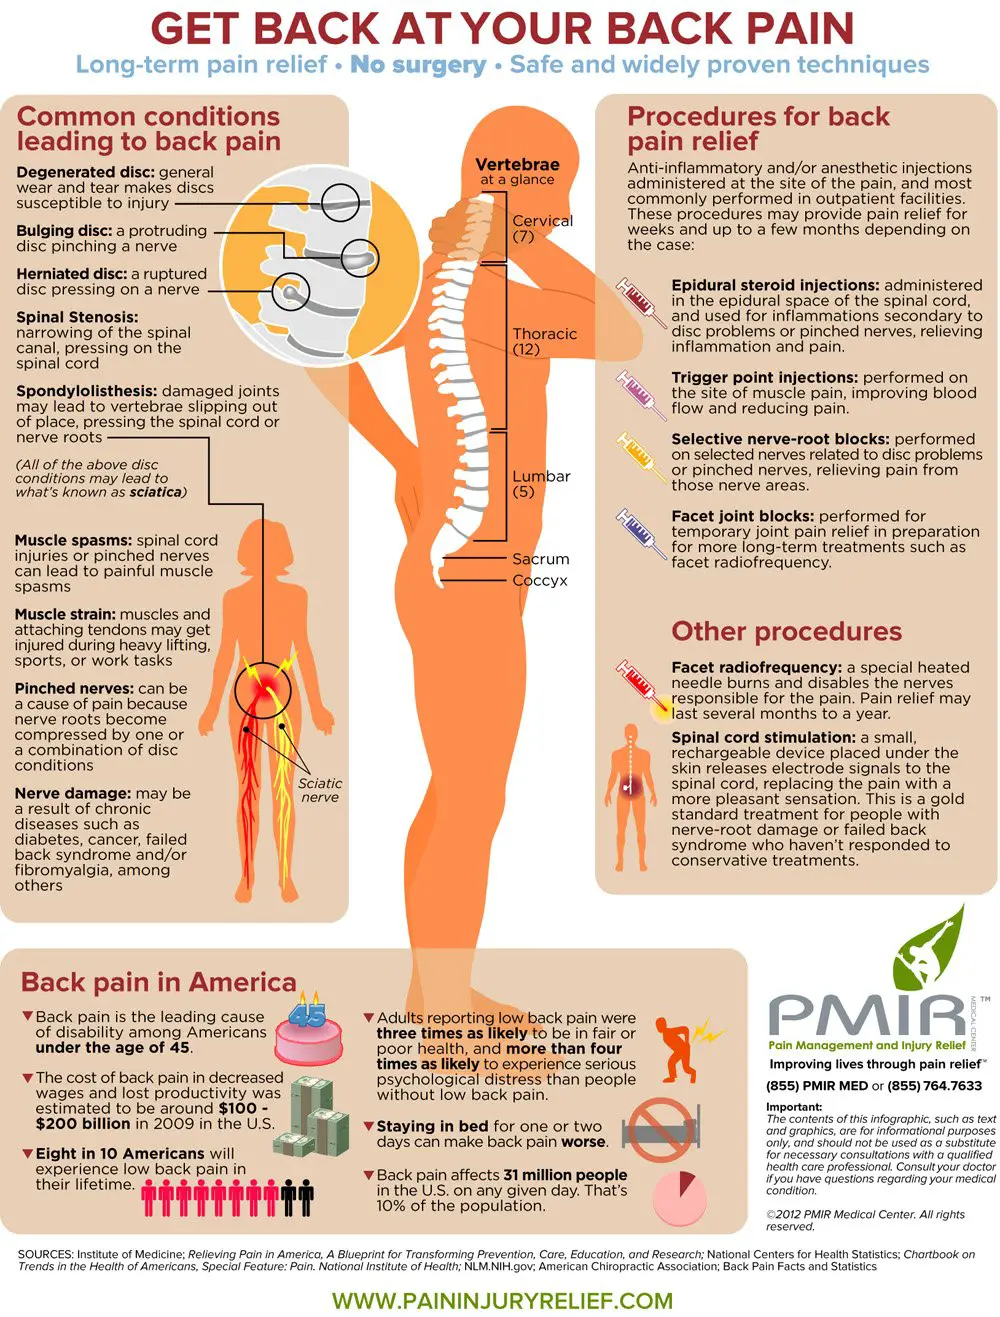 Gear up for Pain Month with our Back Pain Infographic